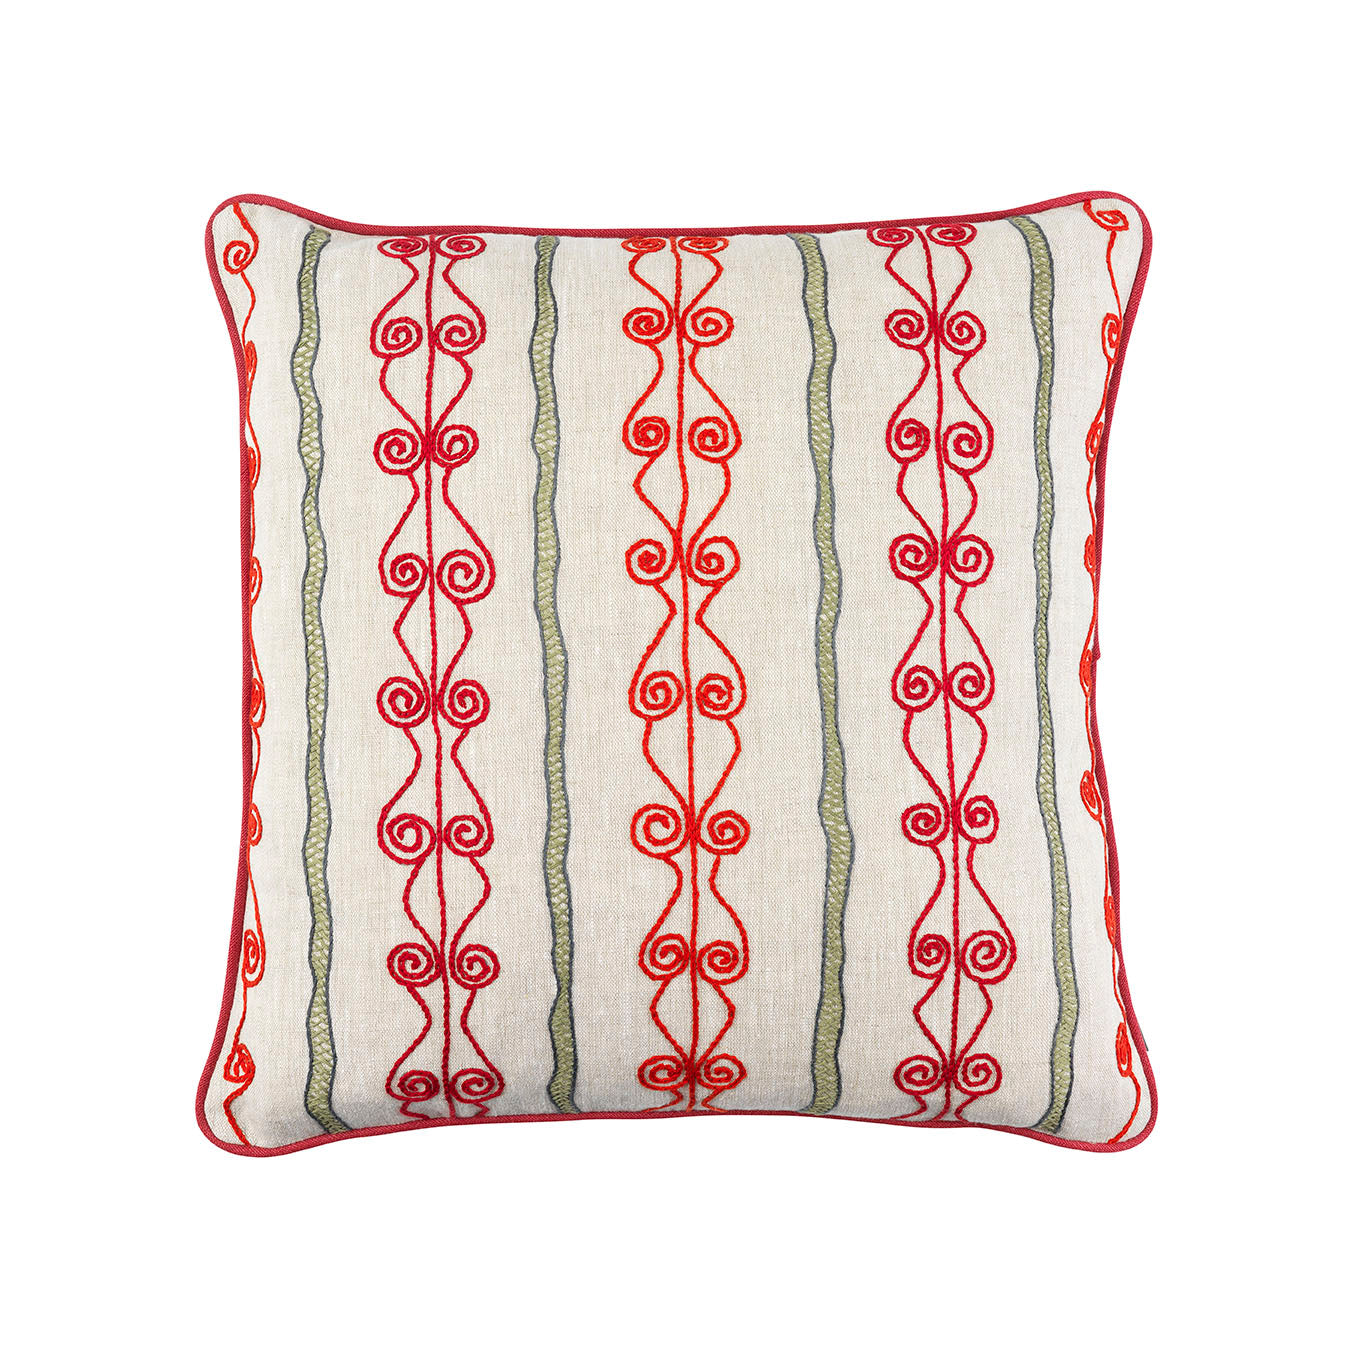 Melissa Wyndham Robert Stephenson Kit Kemp for Fine Cell Work Brunel Embroidered Cushion Red and Green